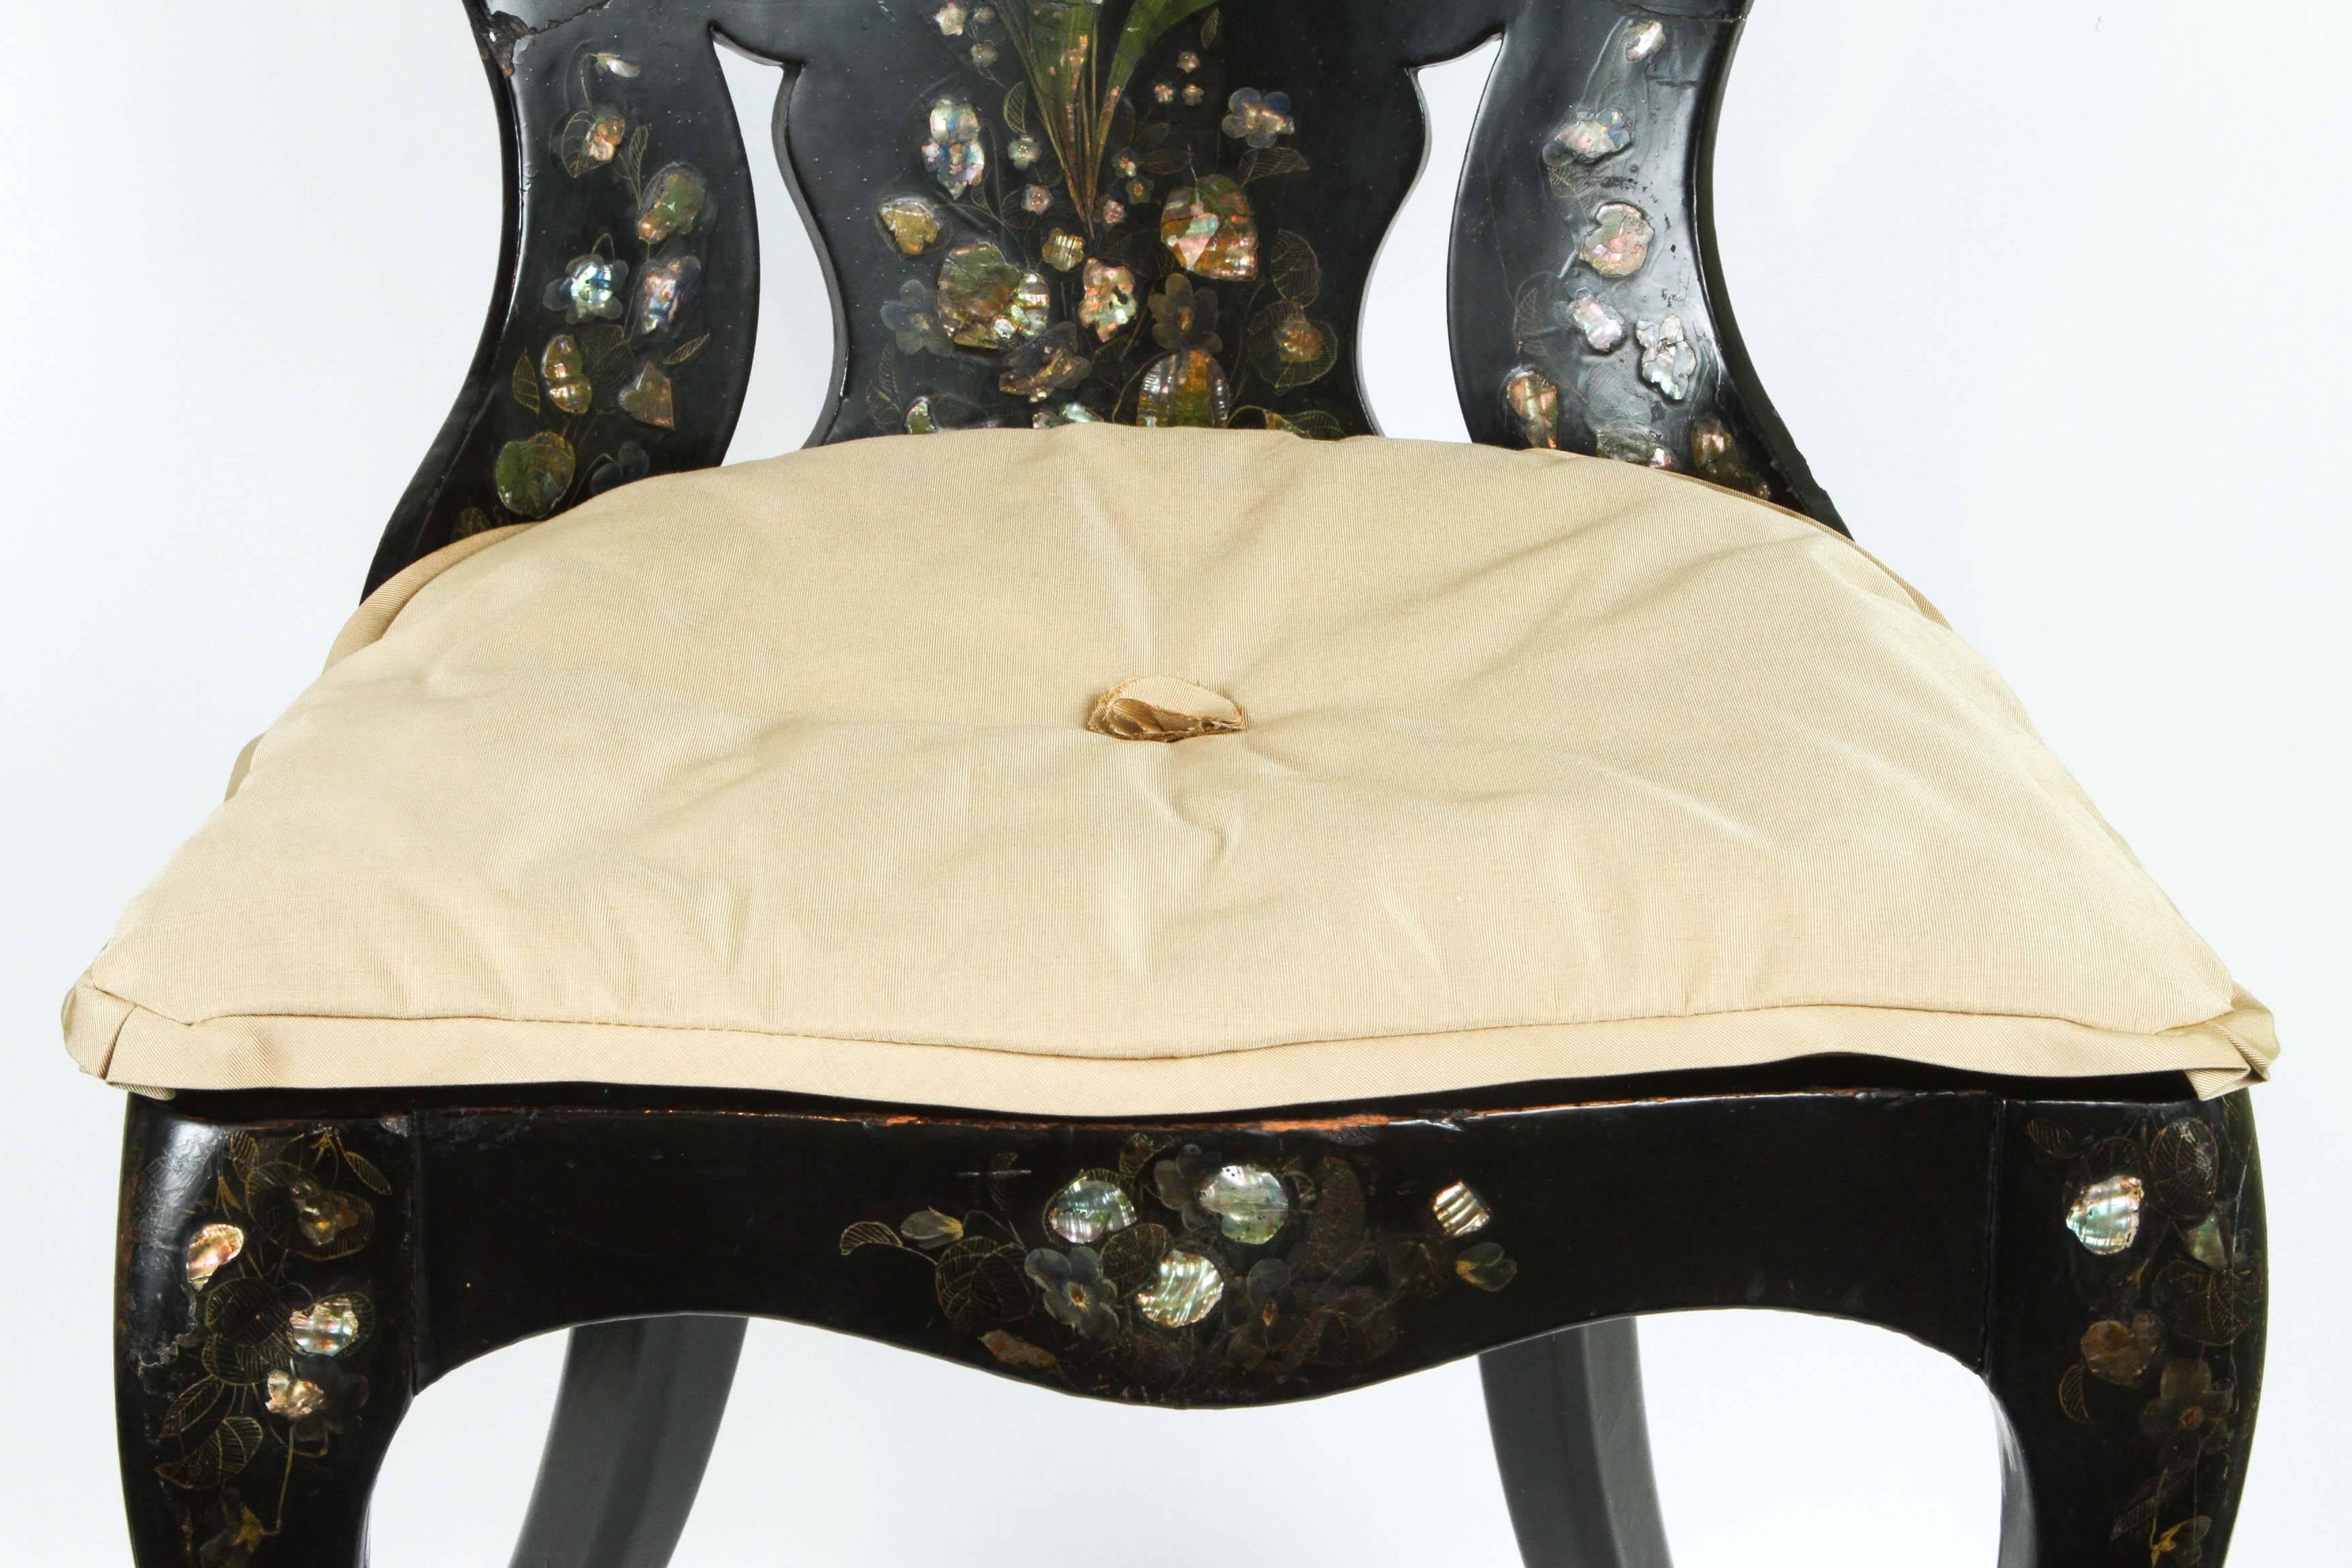 19th Century A Papier-Mache Chair in Black Lacquer with Mother of Pearl Inlay, circa 1850